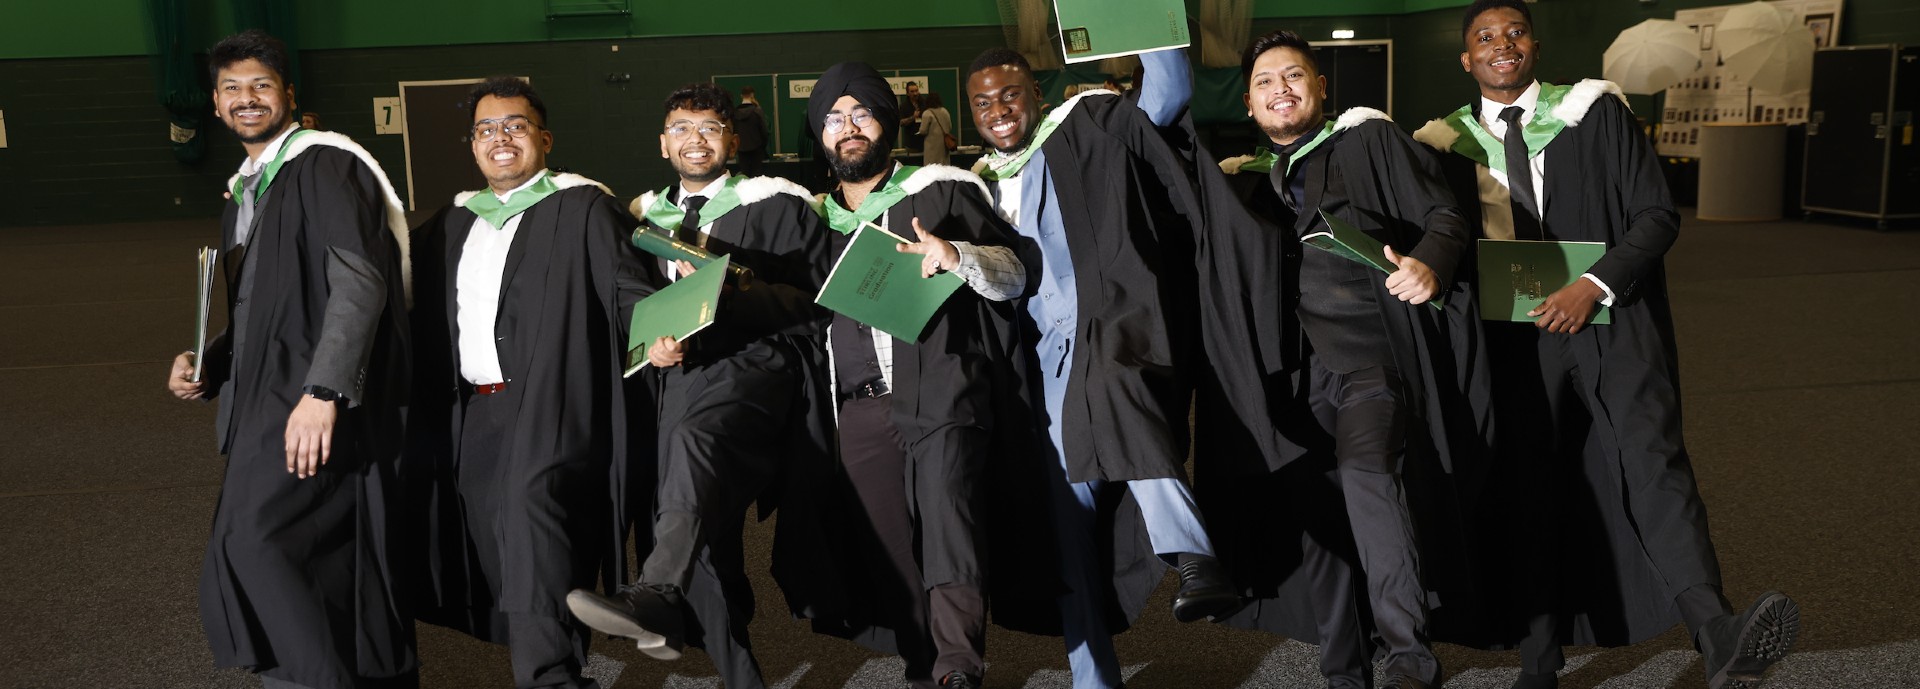 Group of graduates wearing robes ahead of graduation ceremony